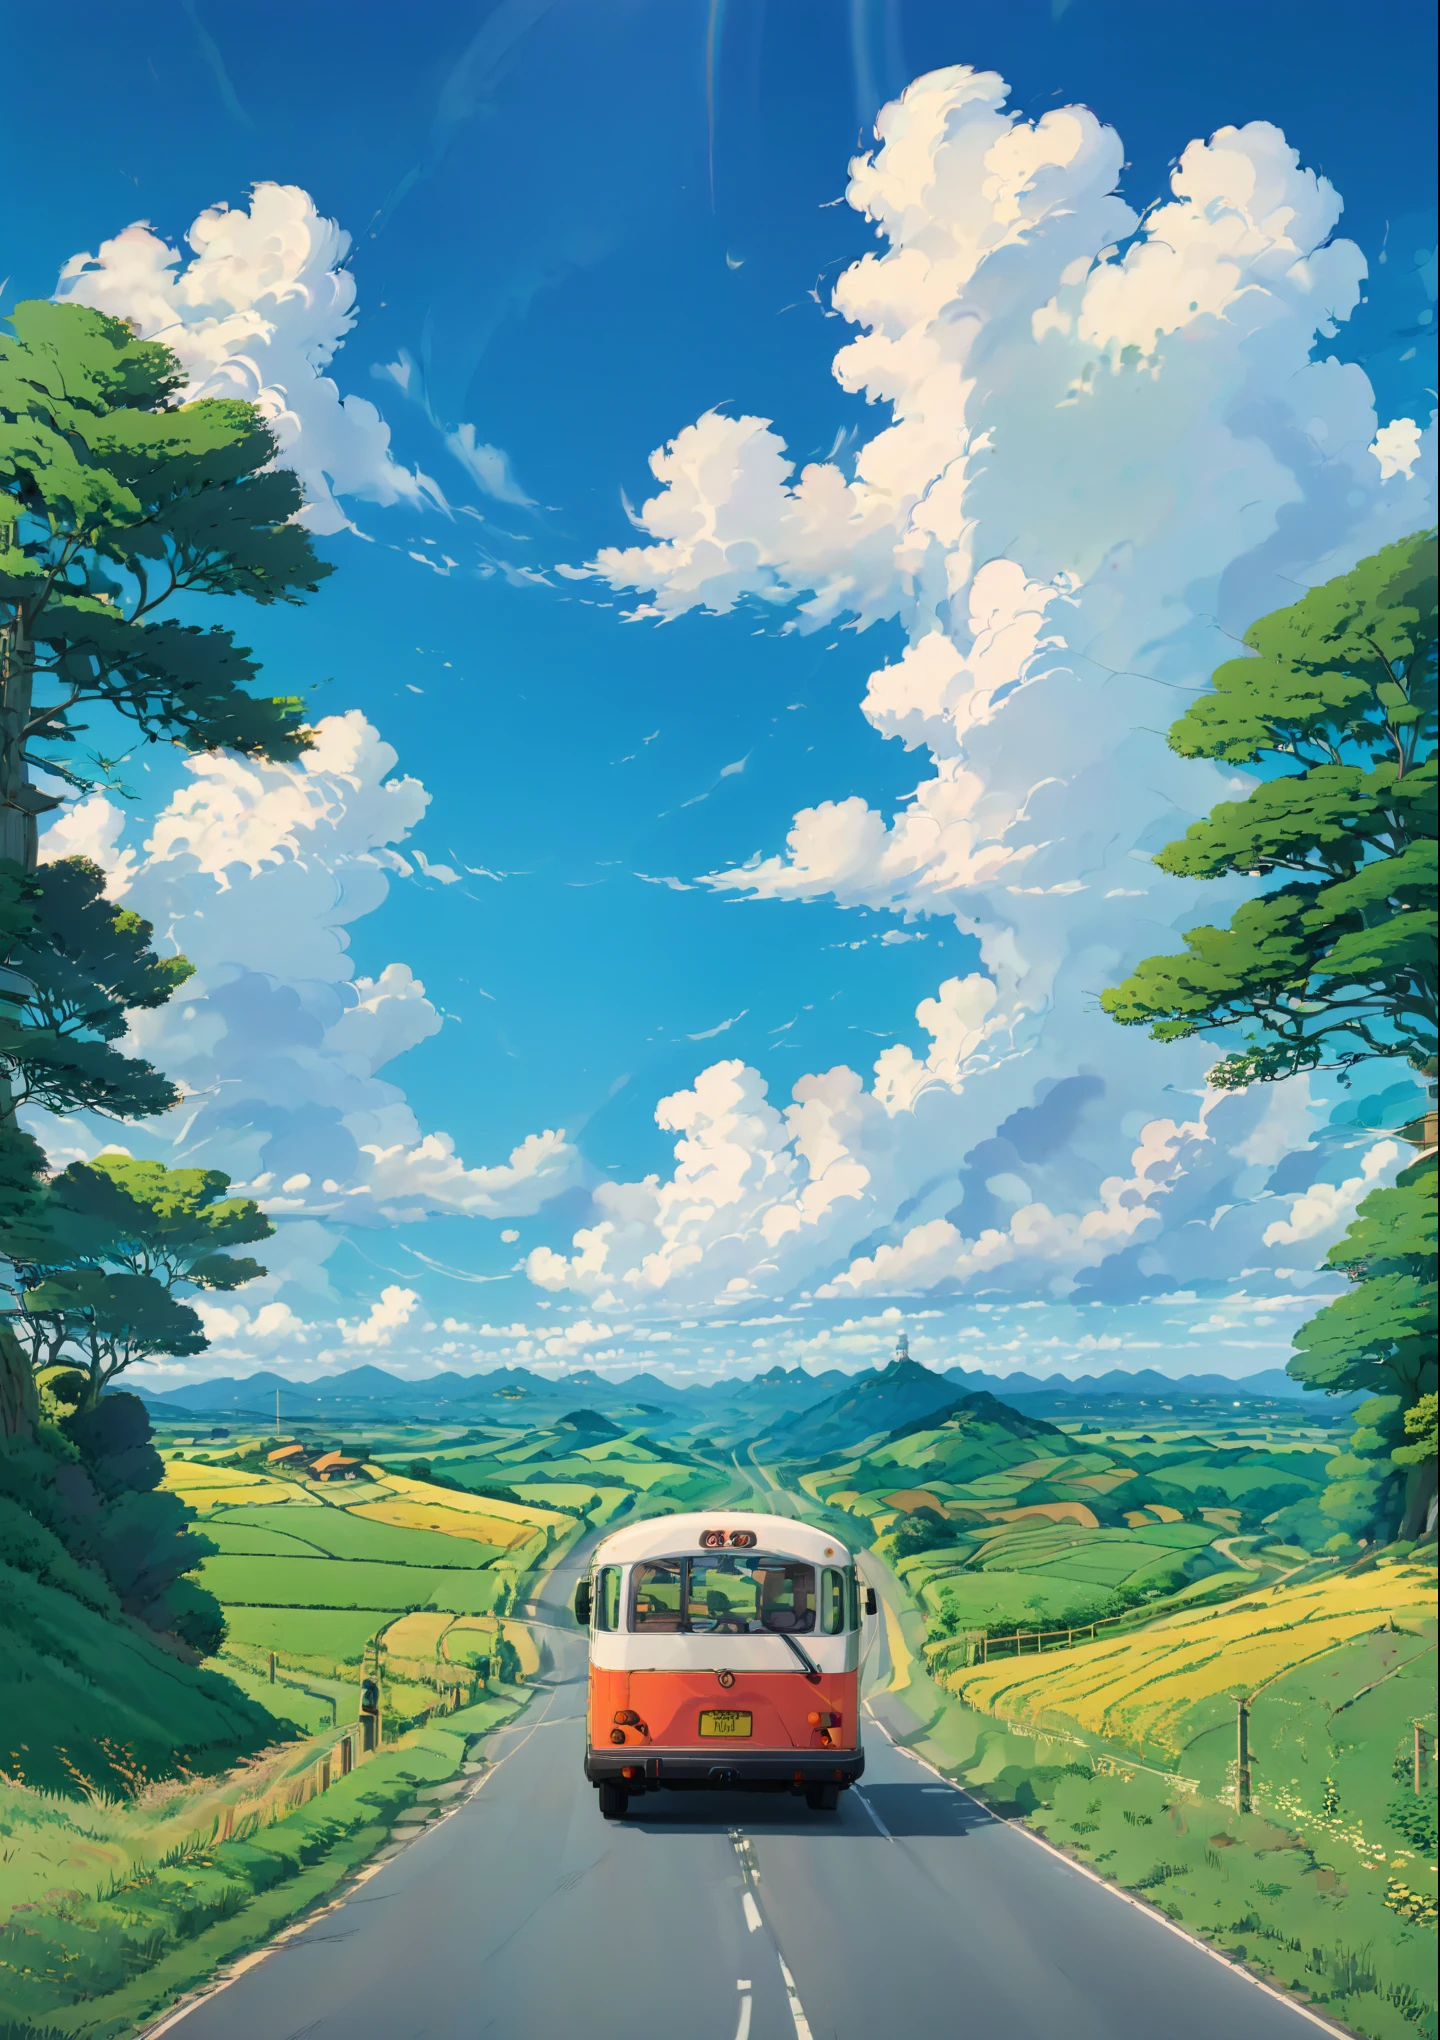 anime scenery of a bus driving down a country road, by Miyazaki, anime countryside landscape, studio ghibli landscape, studio ghibli sky, incredible miyazaki, style of hayao miyazaki, by Hayao Miyazaki, miyazaki's animated film, studio ghibli sunlight, medium shot. by hayao miyazaki, ghibli studio art, ghibli vibe